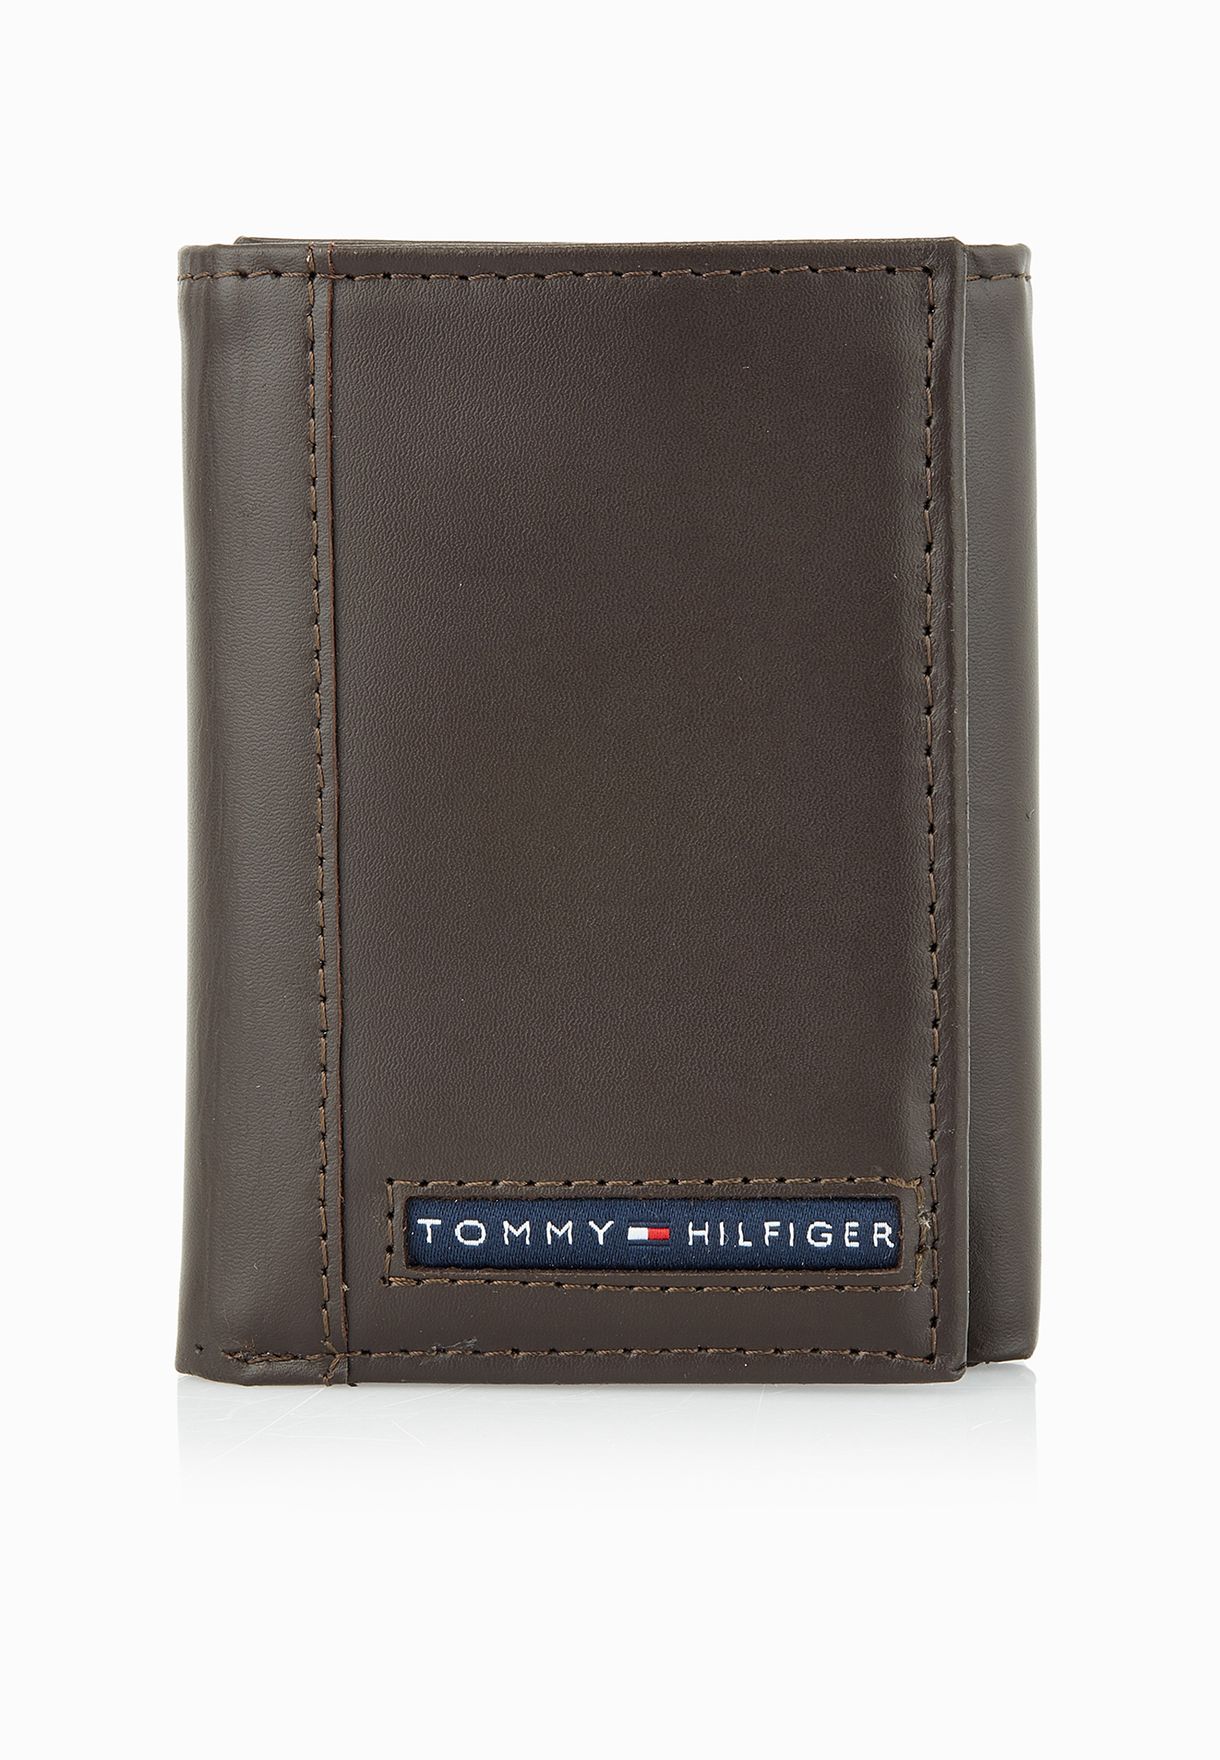 tommy hilfiger cambridge trifold wallet